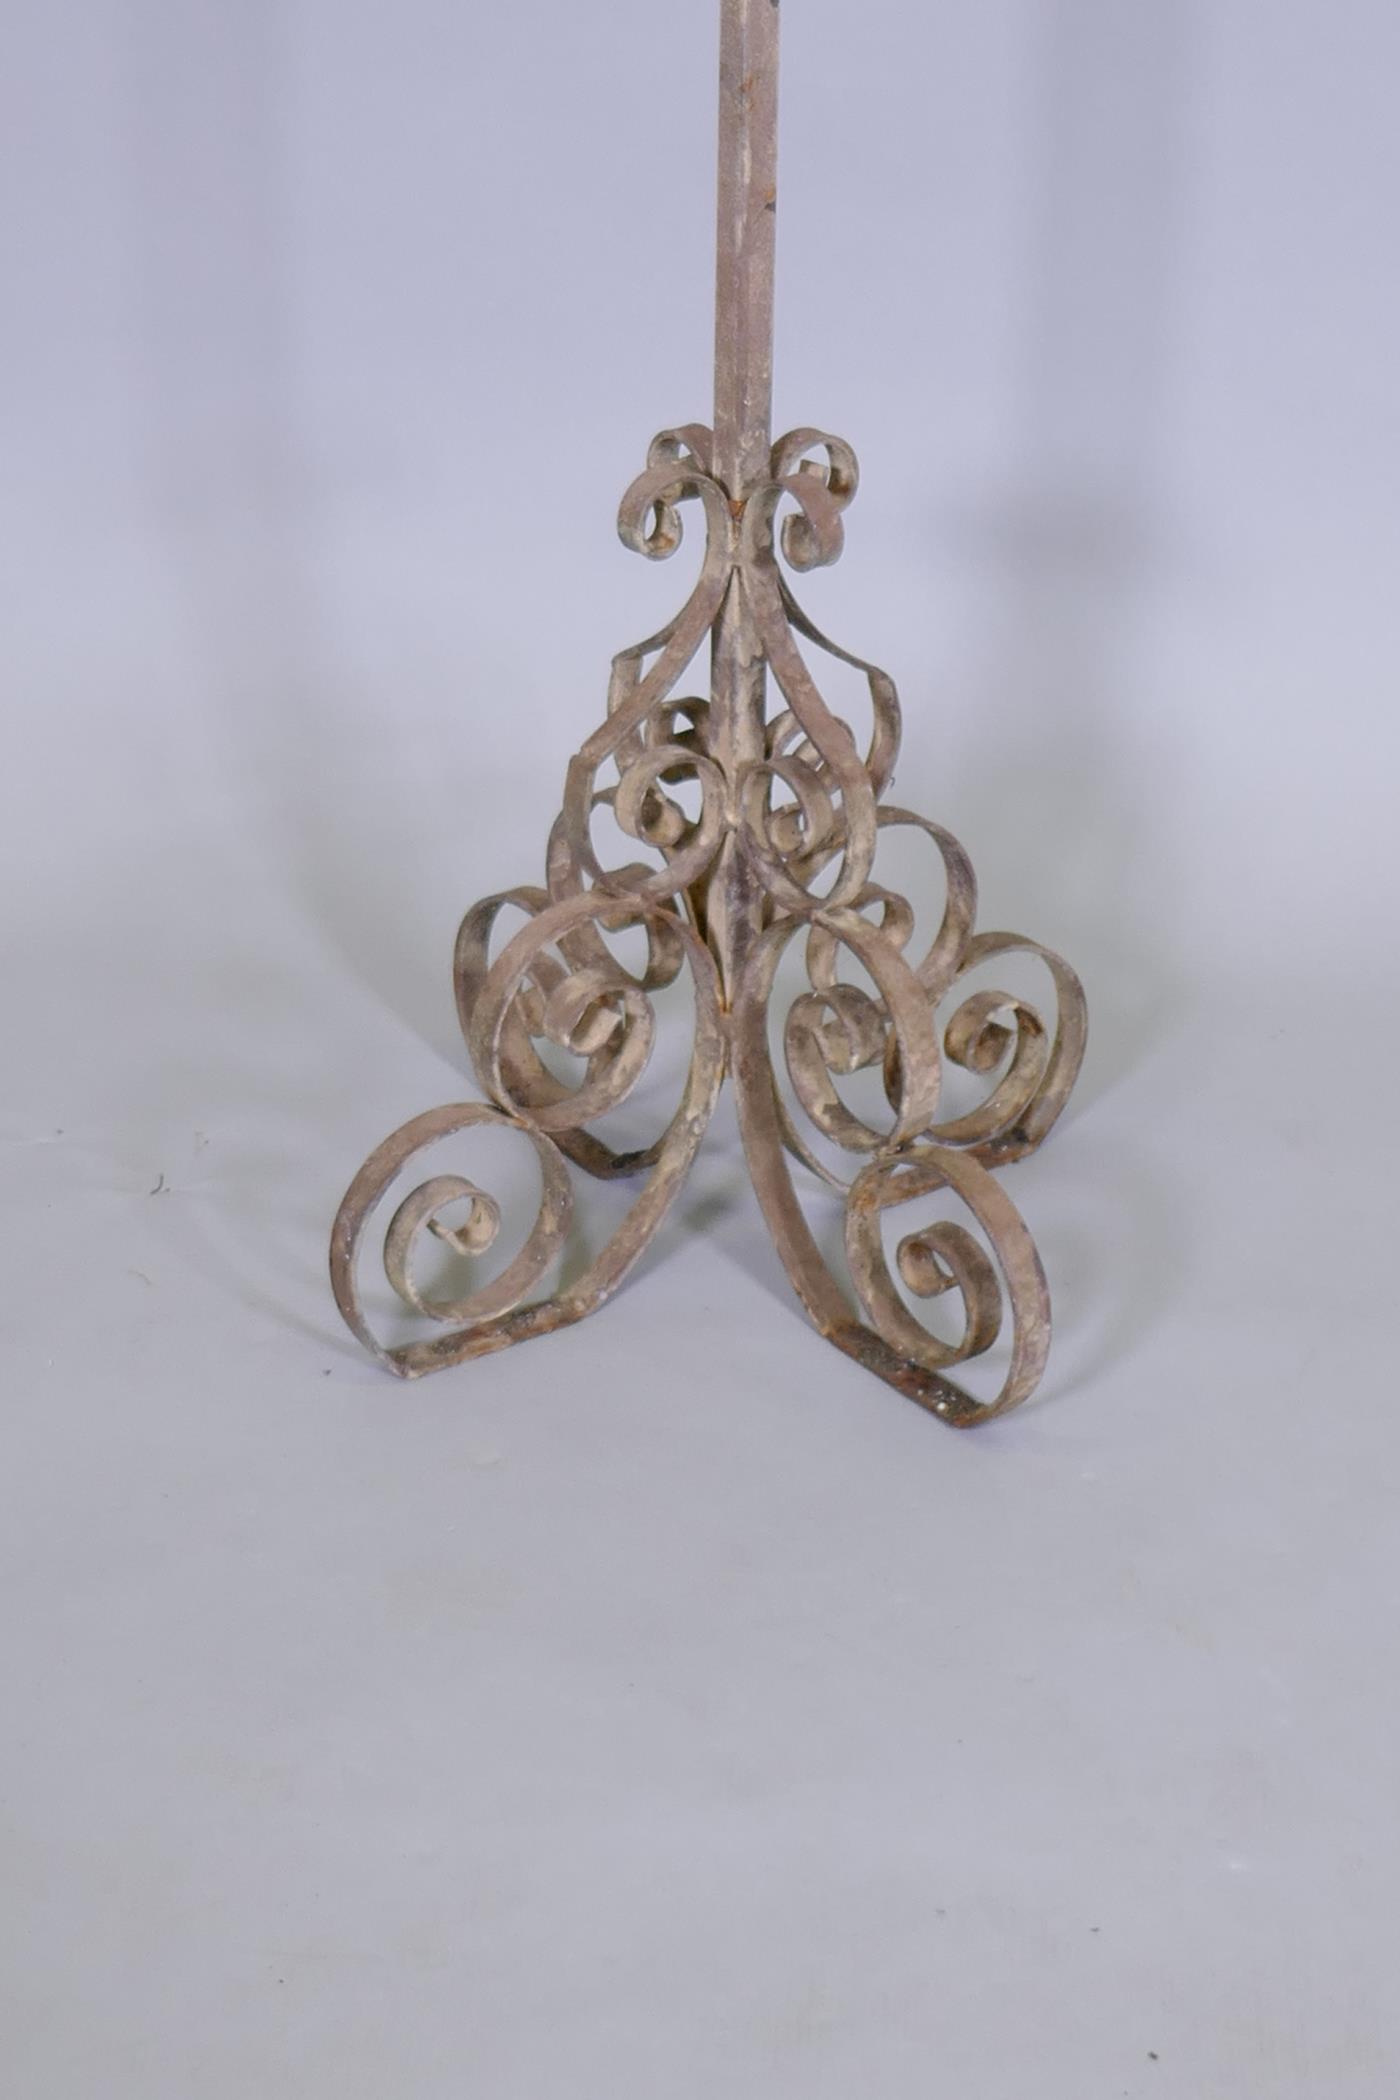 A wrought iron stand with four open work hooks and scrollwork base and artichoke finial, 160cm high - Image 2 of 2